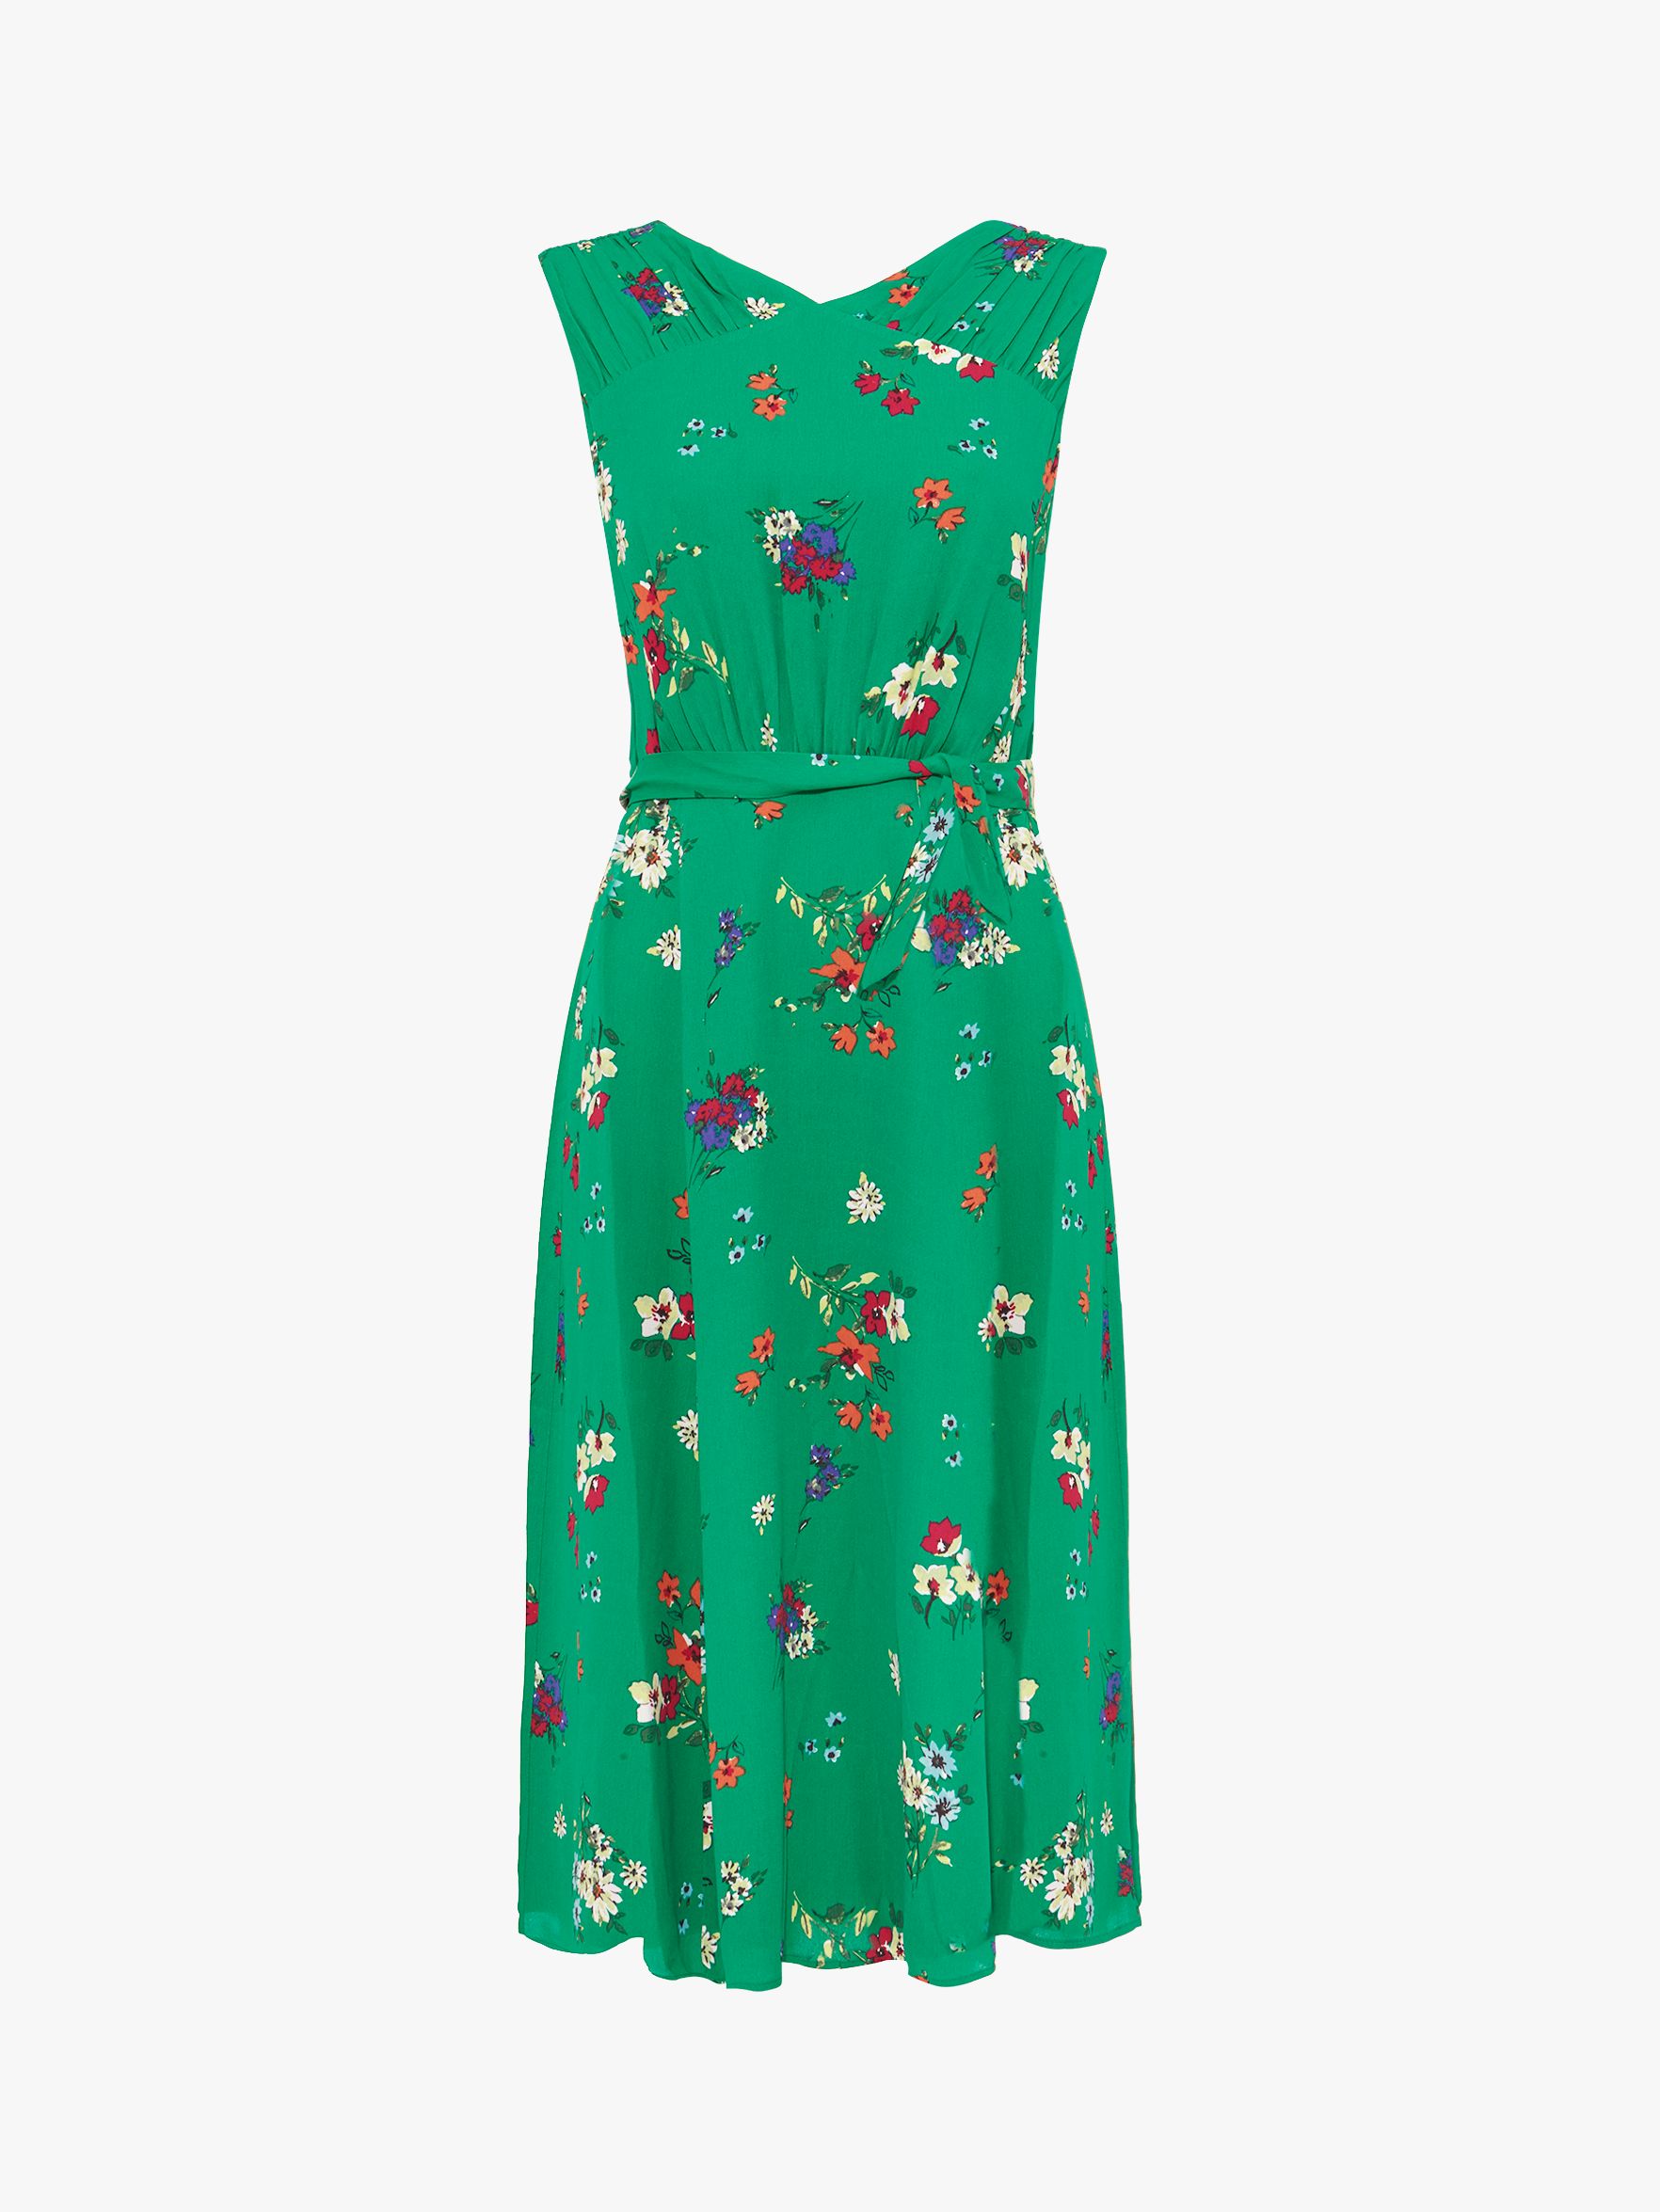 Phase Eight Meryl Floral Fit & Flare Dress Emerald Size UK18 RRP120